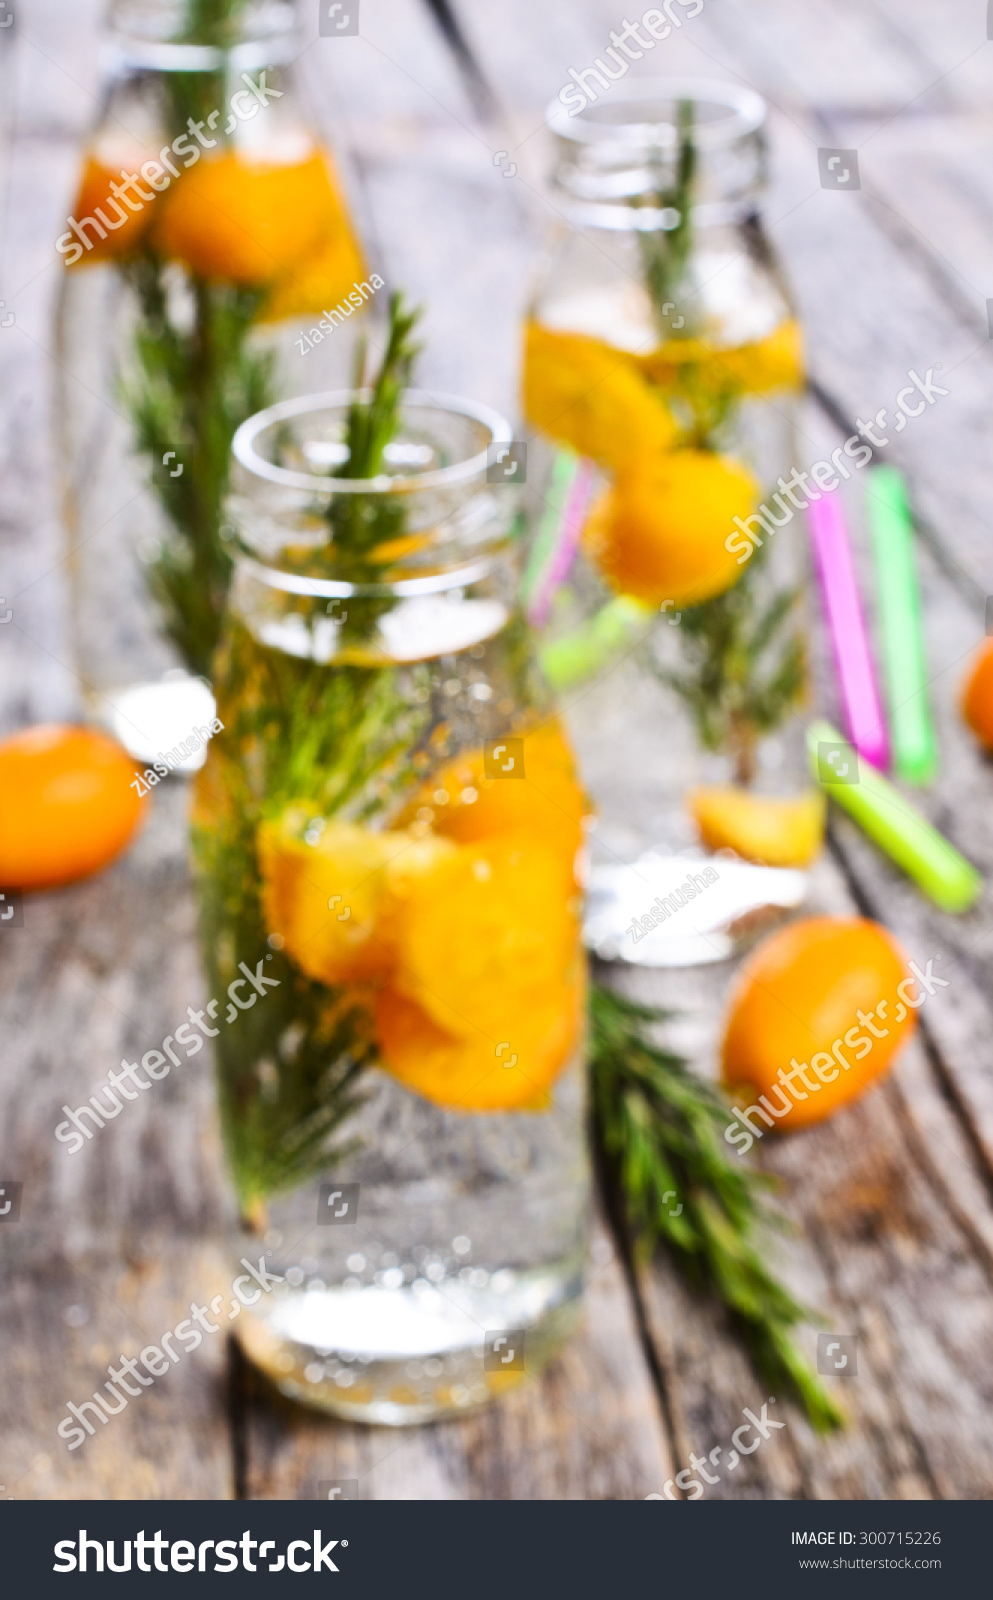 Blurred background: bottles with a clear liquid, citrus and rosemary on a wooden surface #300715226